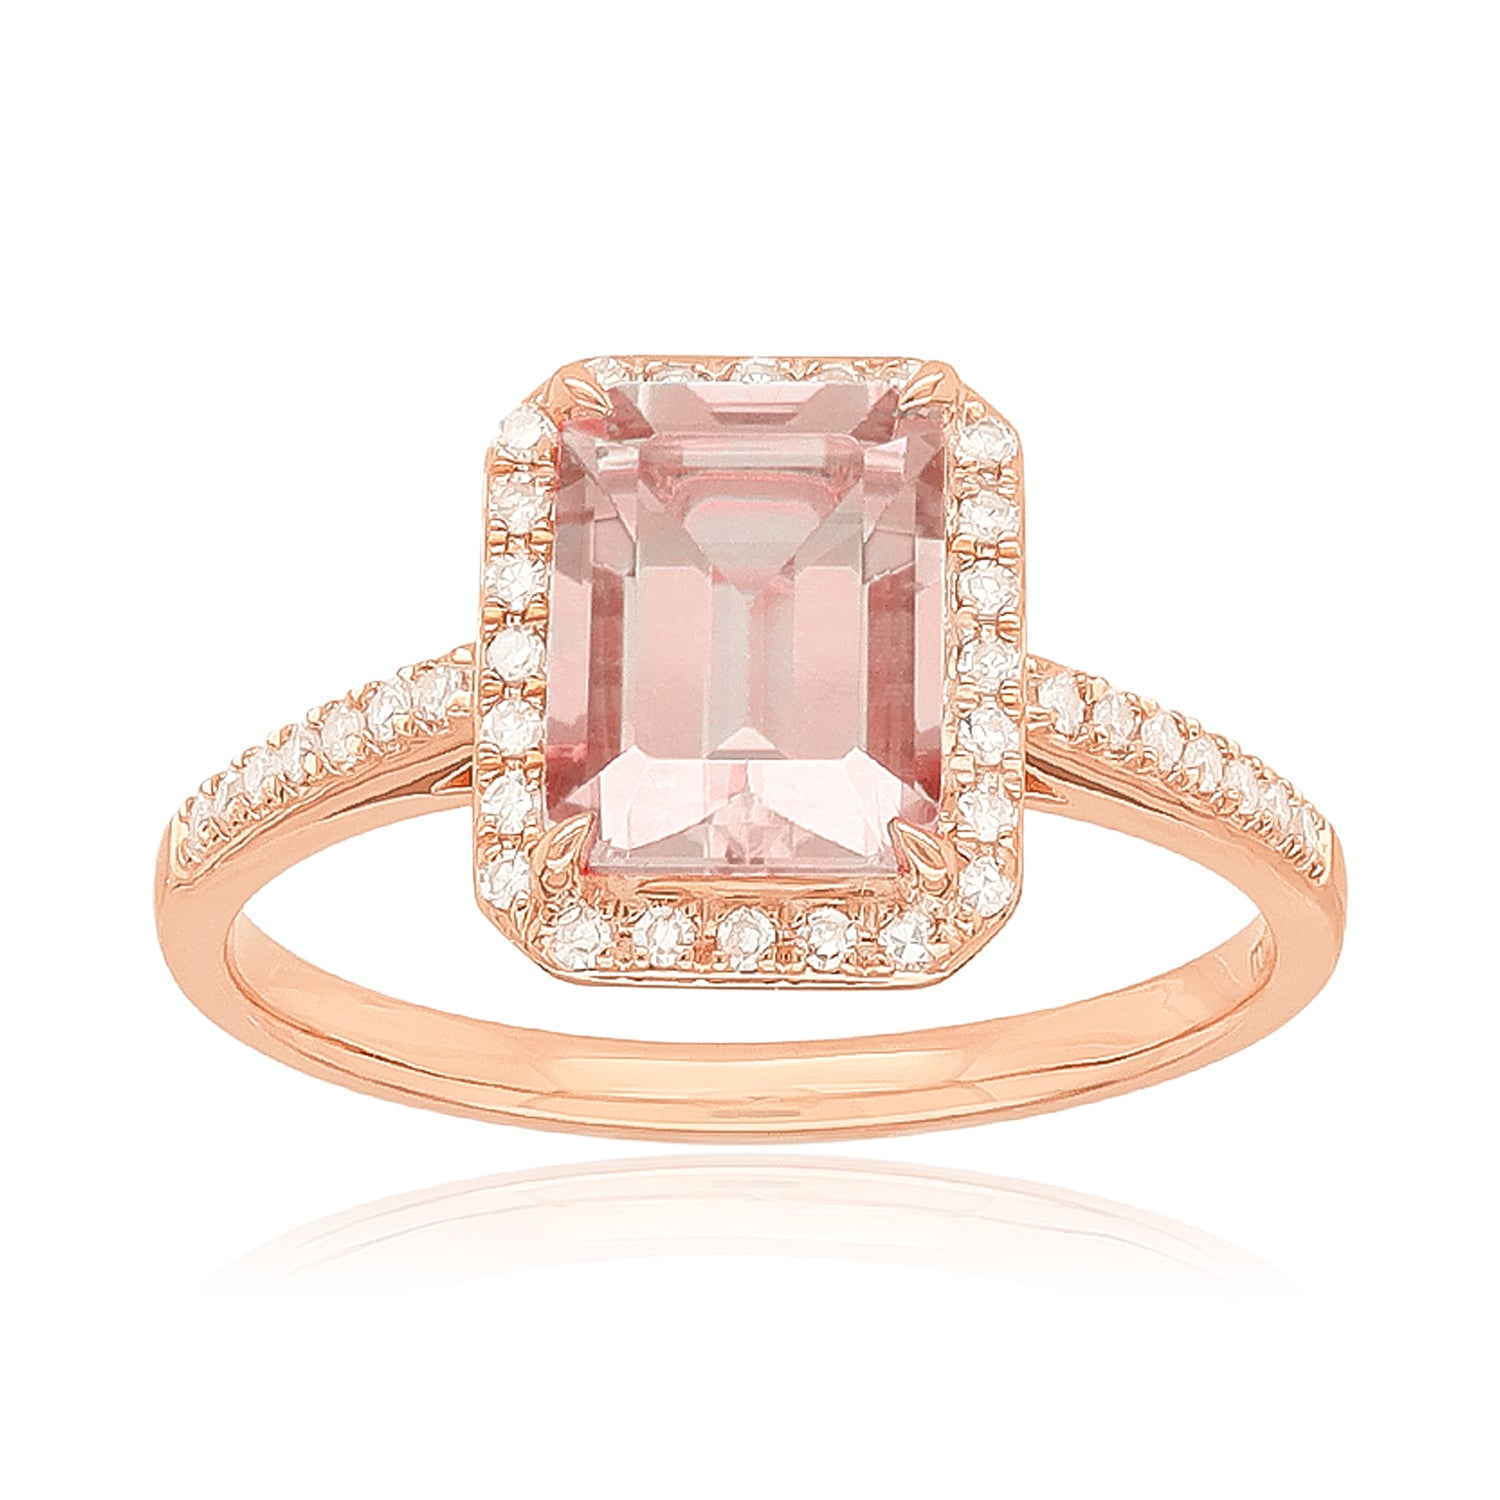 Sir Michael Hill Designer Engagement Ring with Morganite & 0.40 Carat TW of  Diamonds in 18kt White Gold